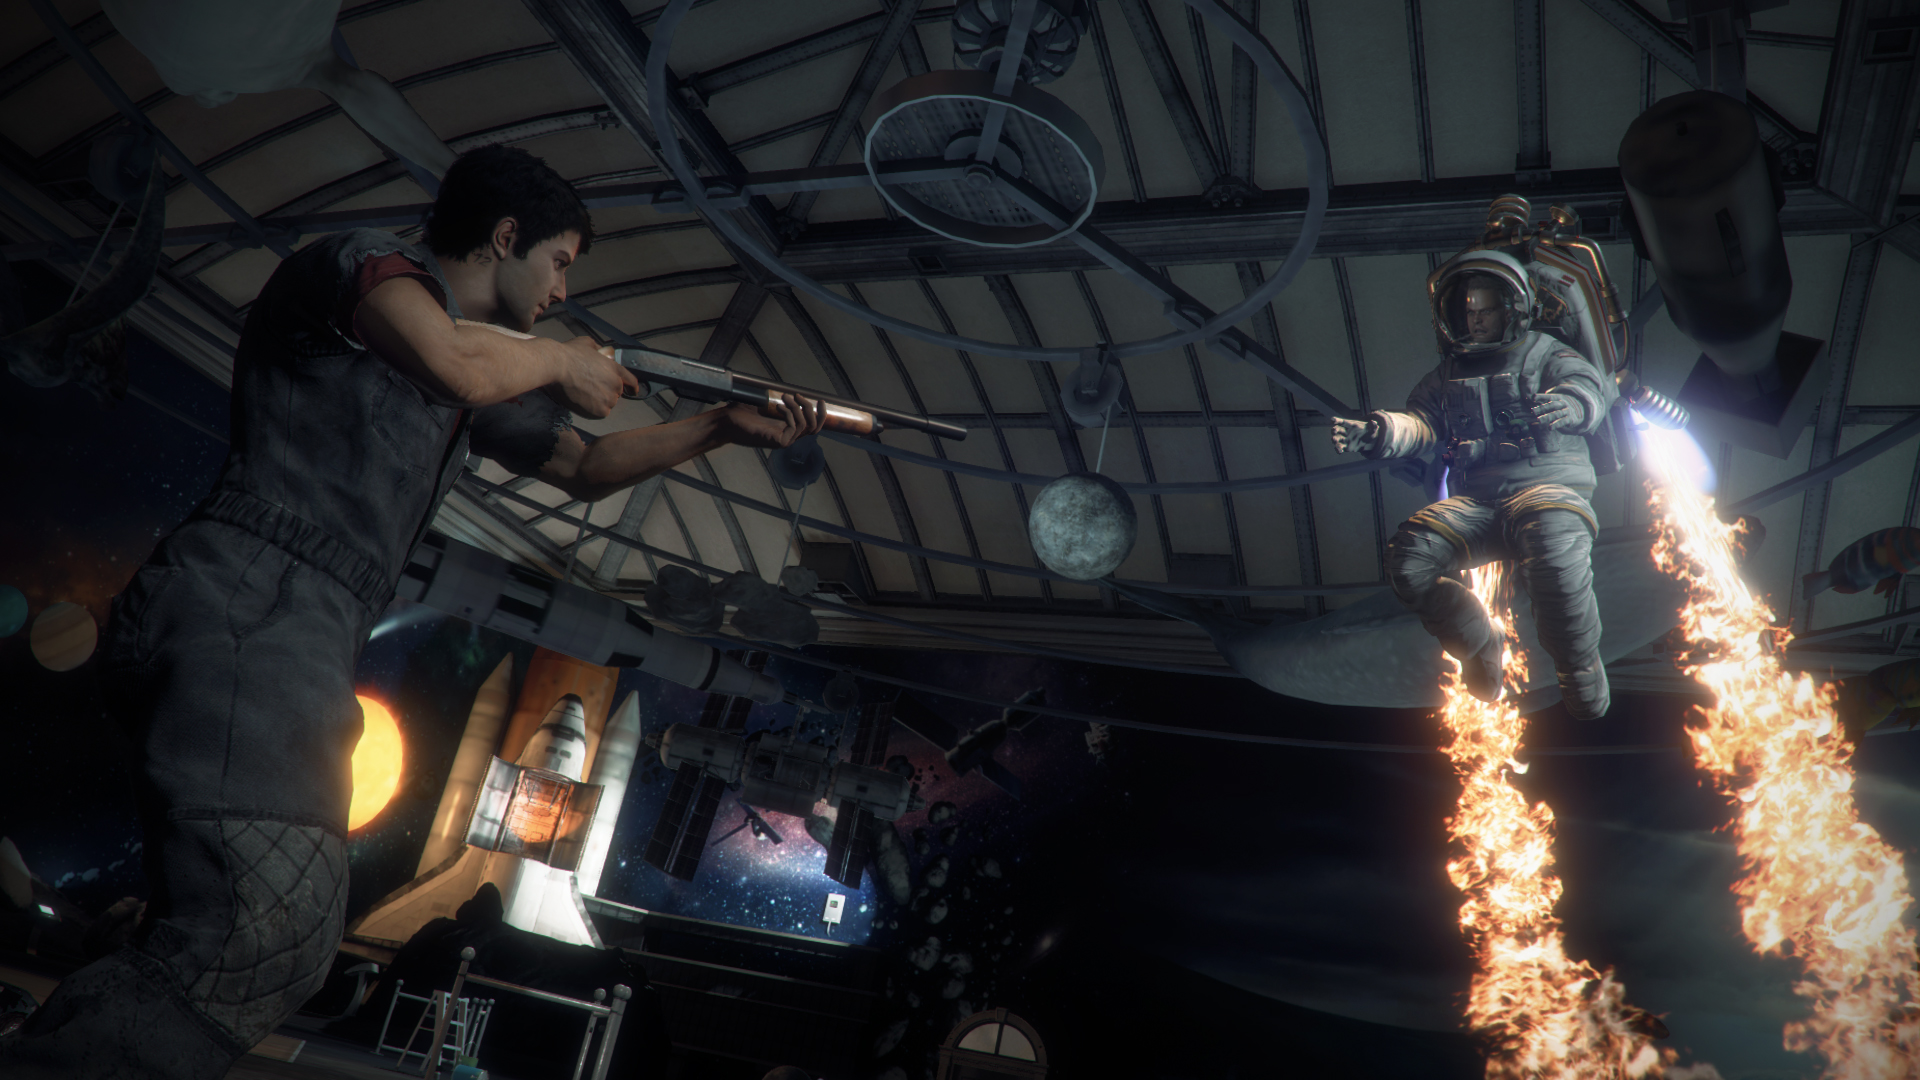 Dead Rising 3 Review - IGN